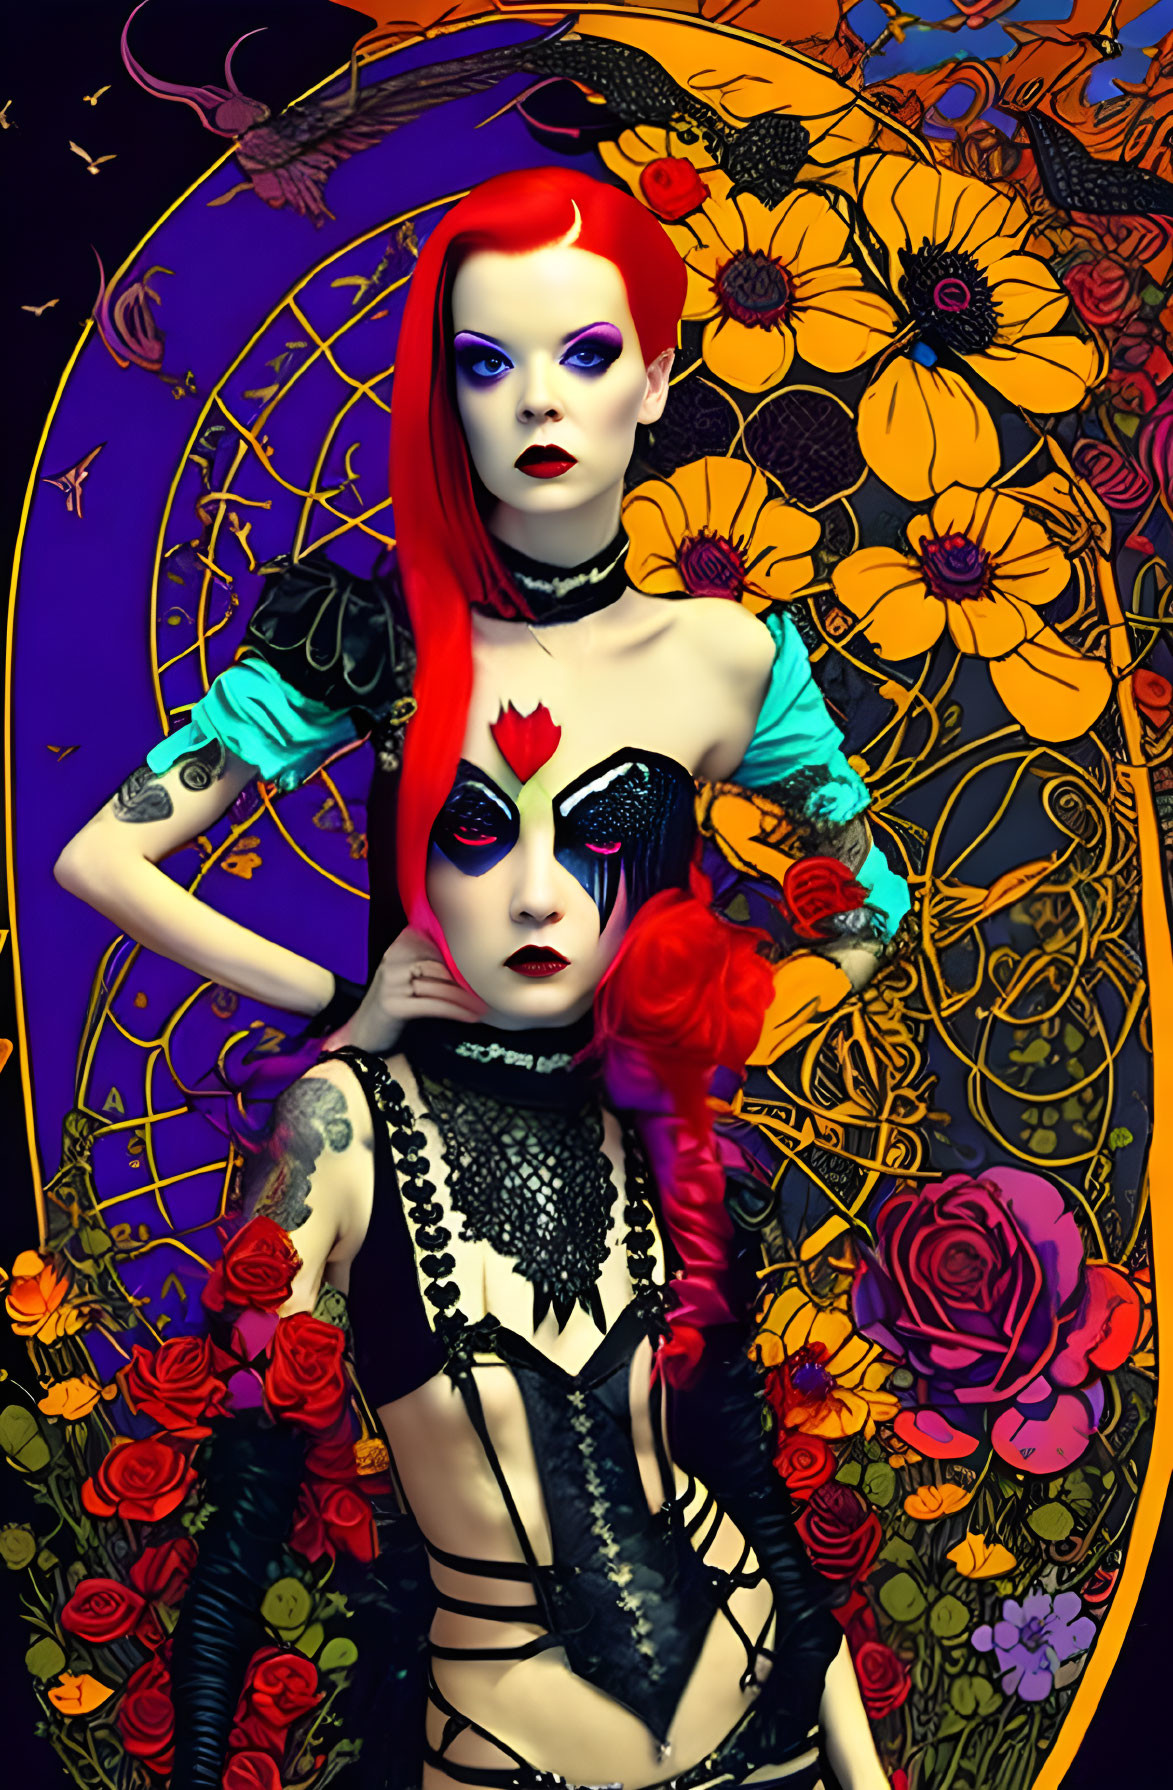 Gothic-inspired artwork: Two stylized women with striking makeup amid floral backdrop